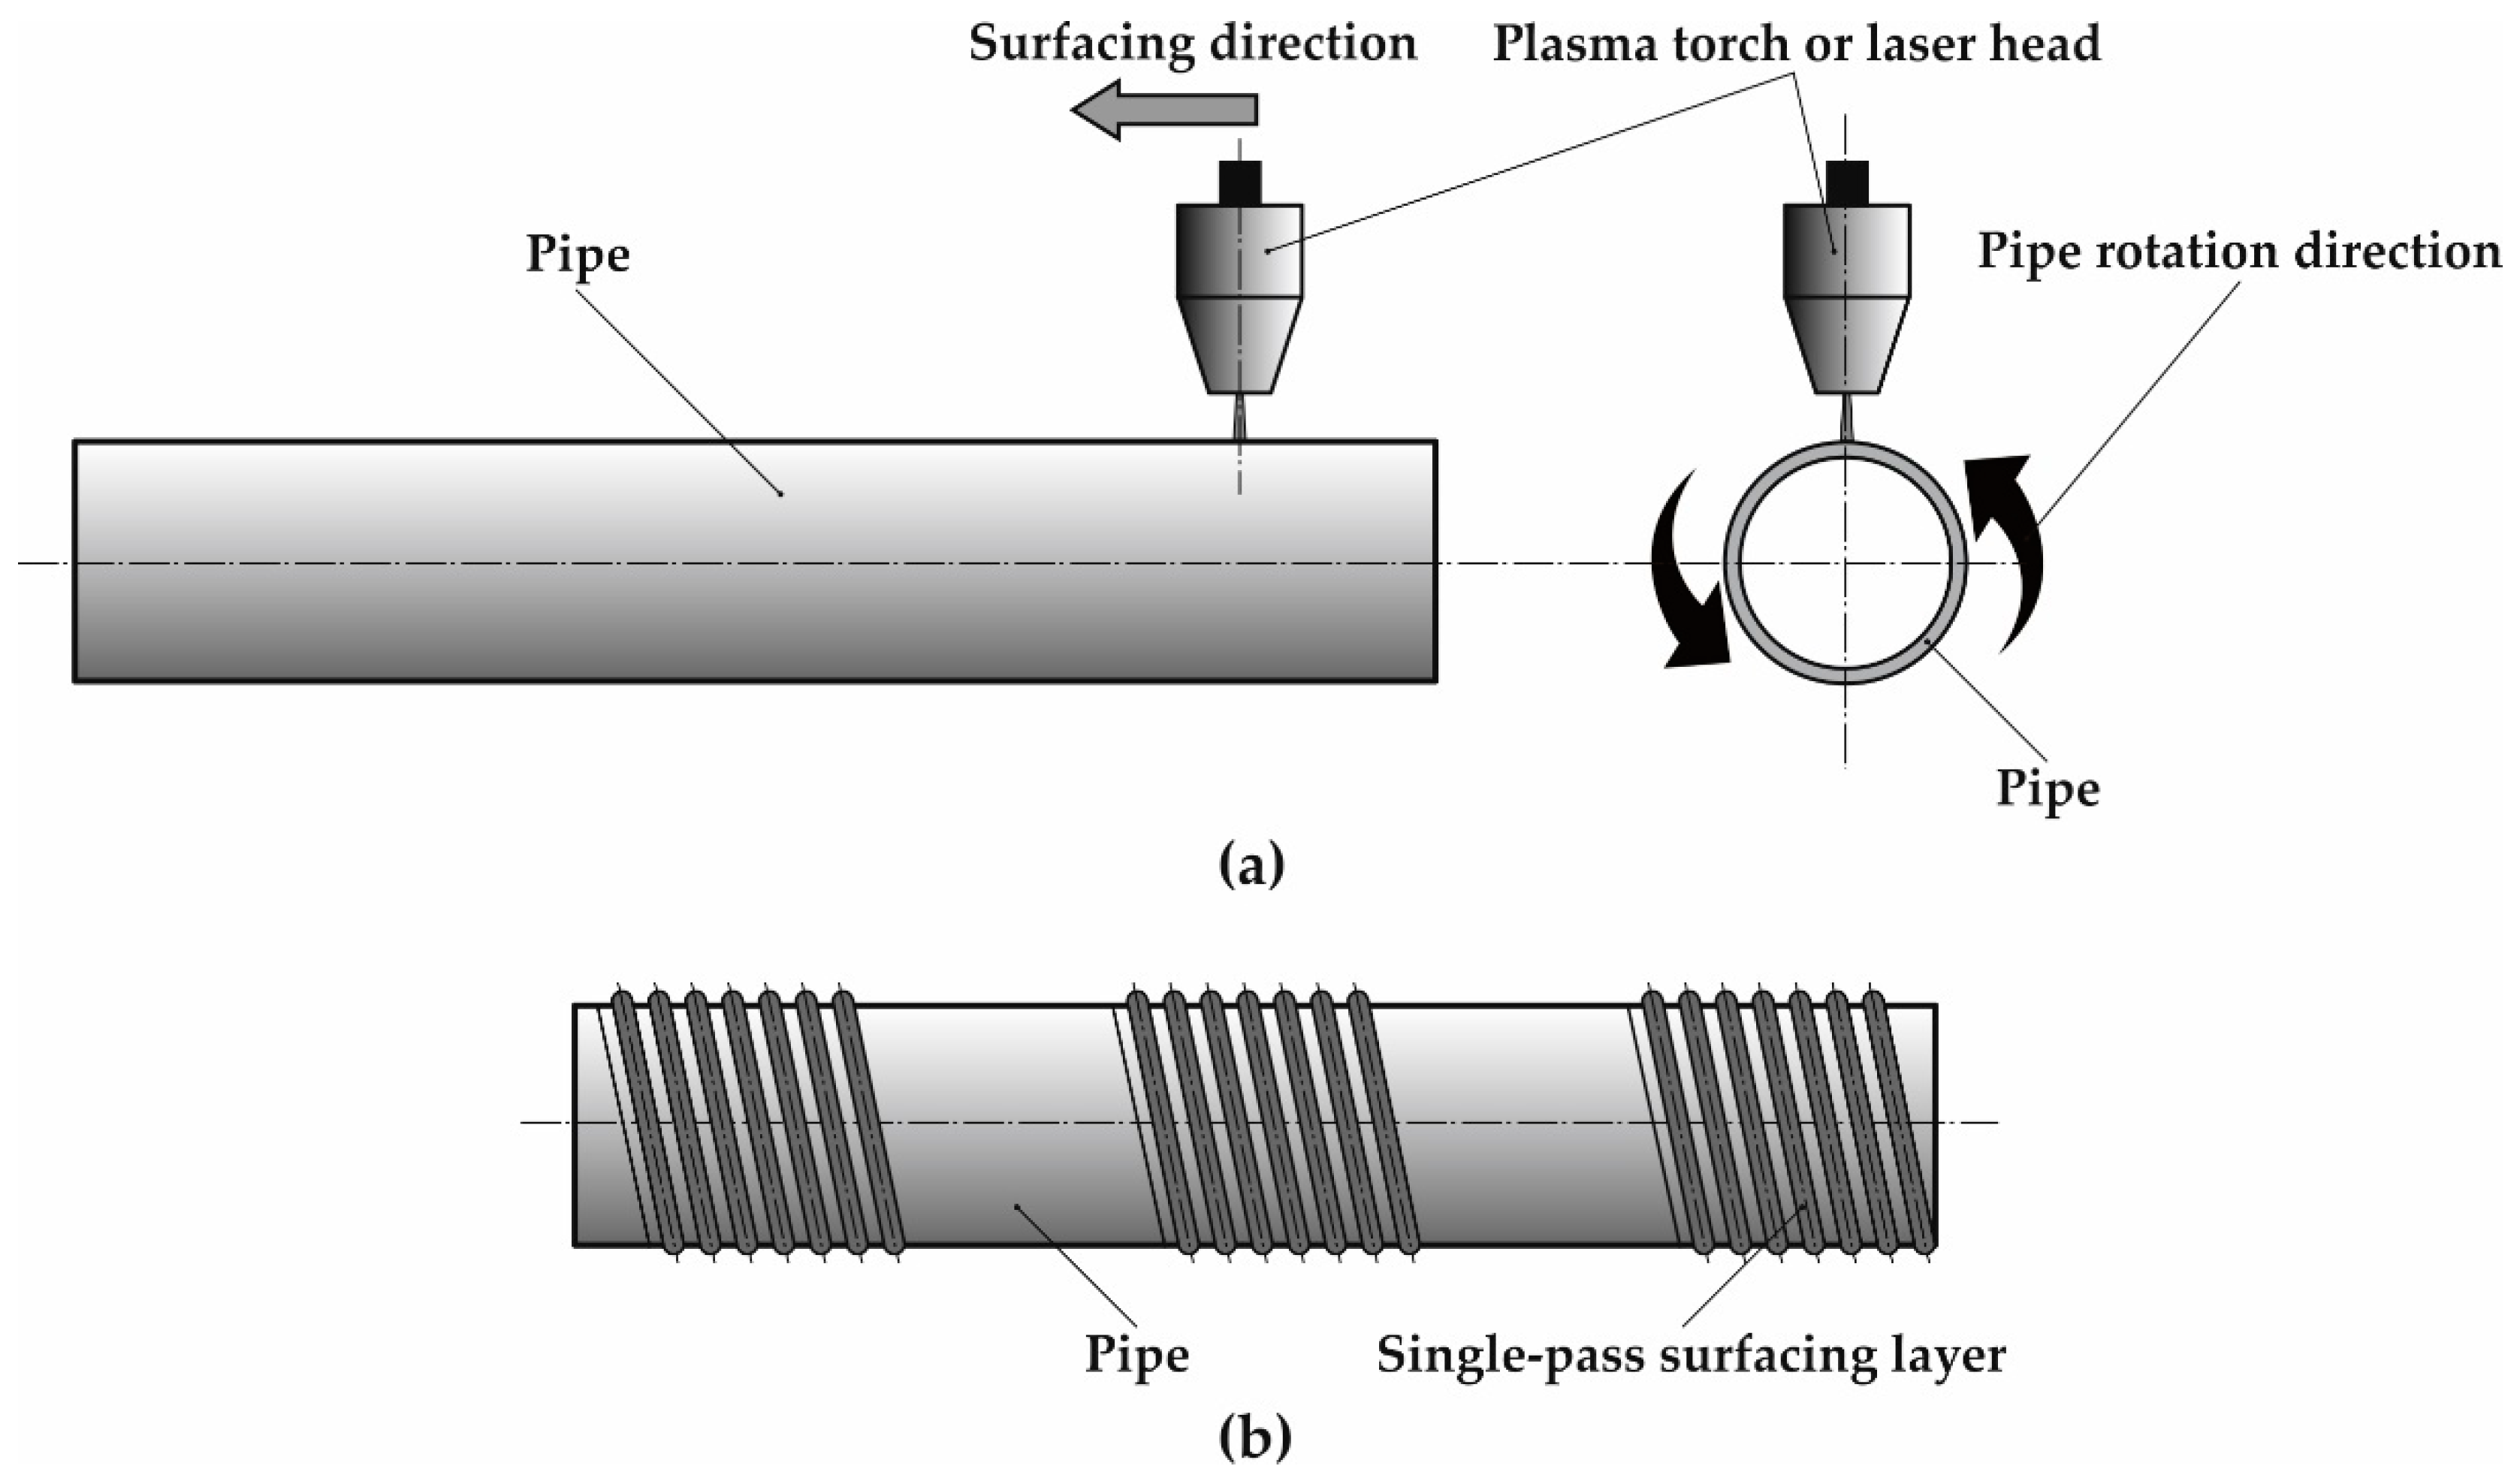 Materials | Free Full-Text | Comparative Analysis of Laser and Plasma  Surfacing by Nickel-Based Superalloy of Heat Resistant Steel